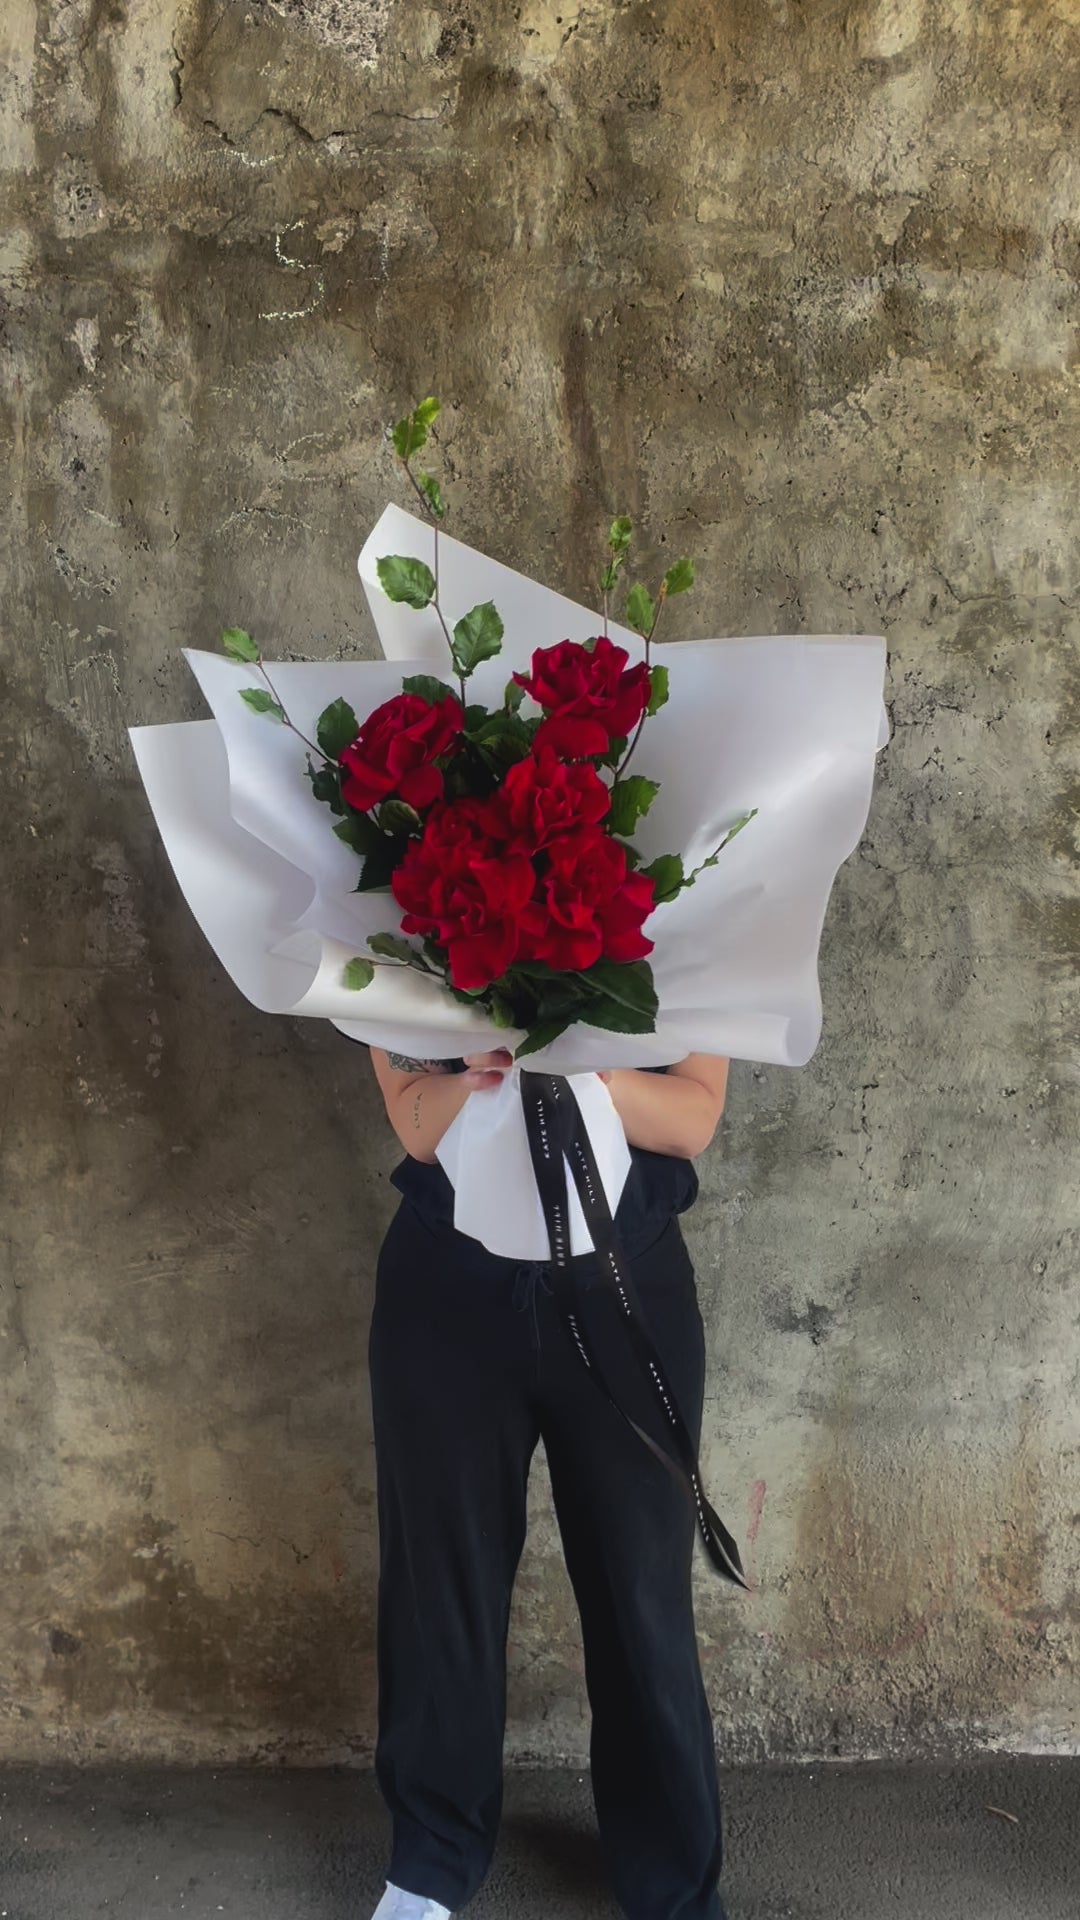 ROSA Red Rose Flower Bouquet | Pre-Order for Valentines Day - February 14